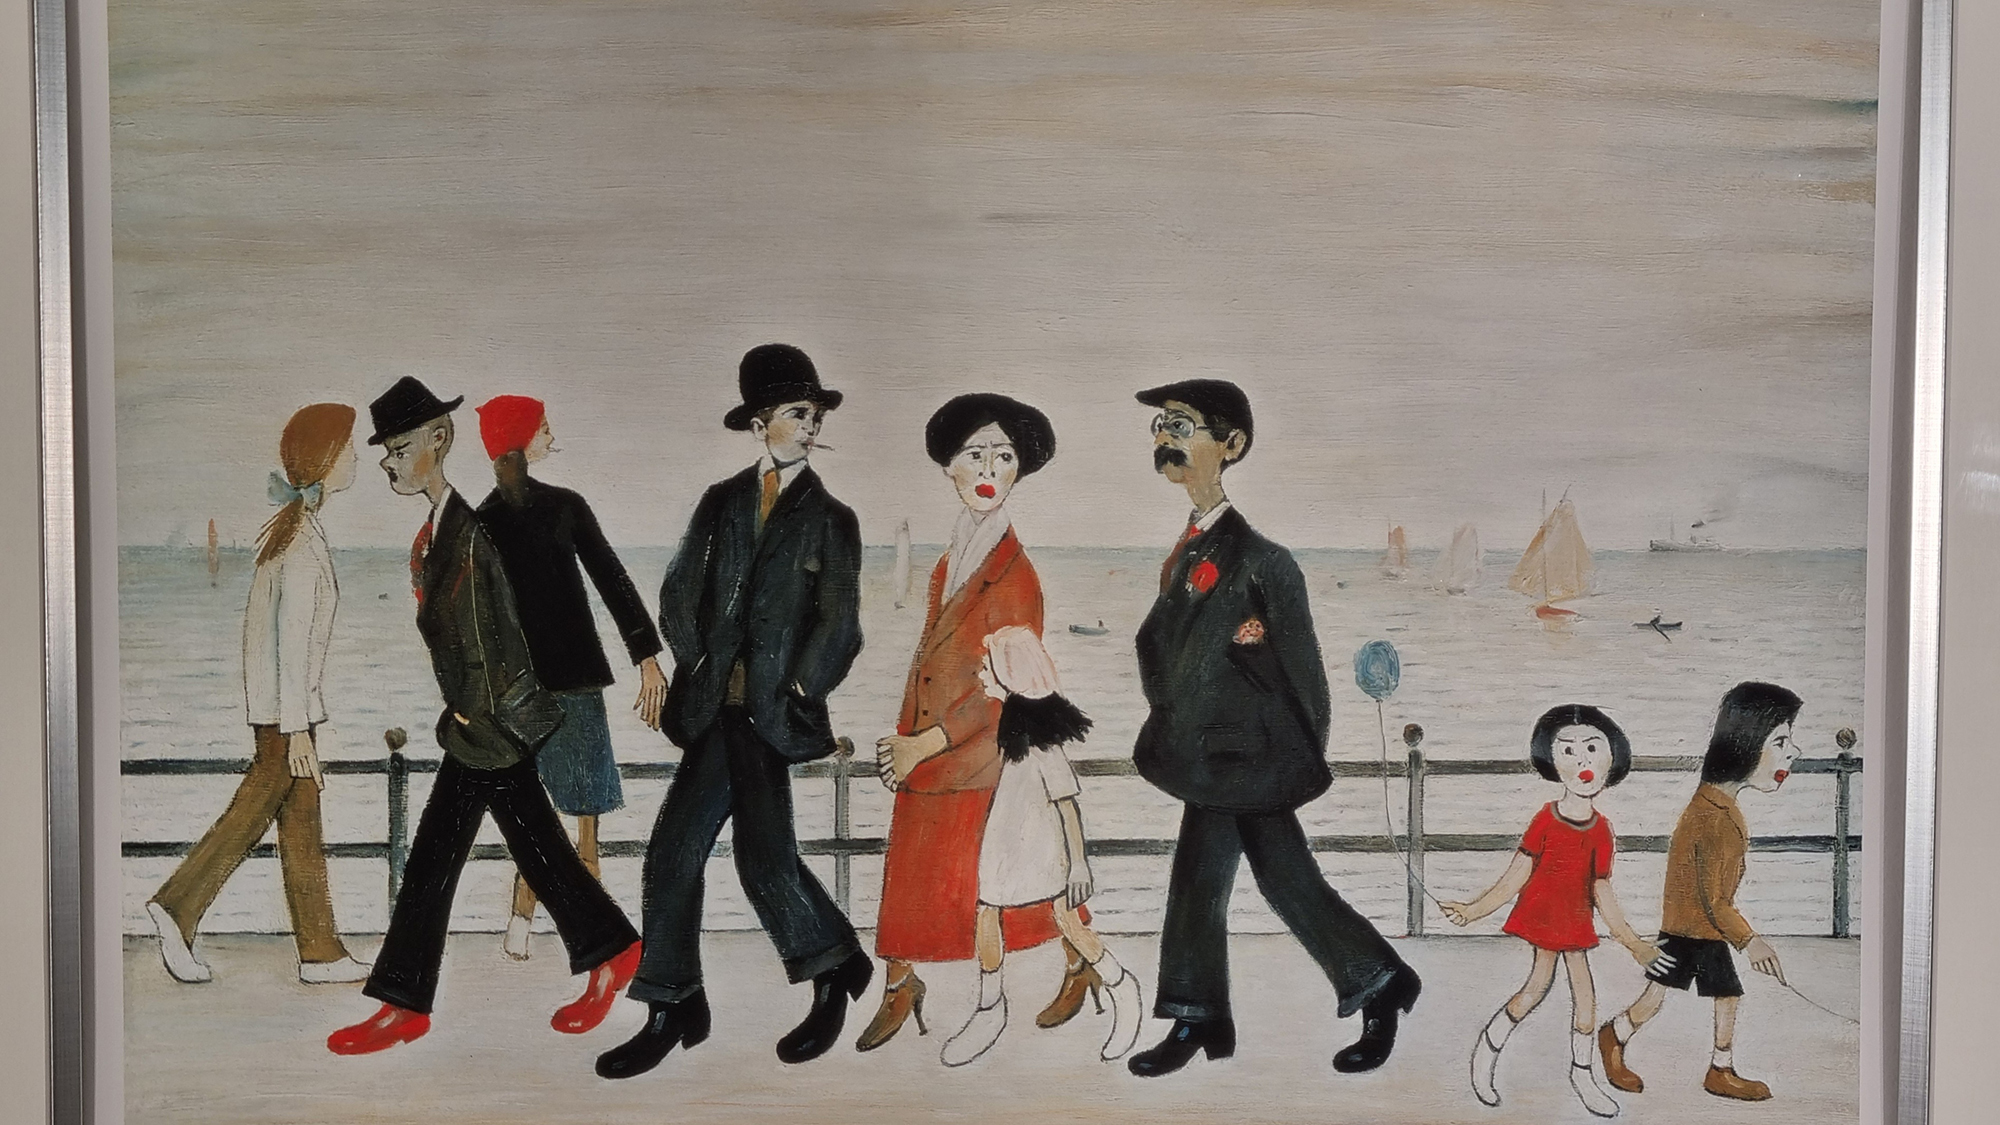 Limited Edition L.S. Lowry ""On The Promenade"" - Image 2 of 7